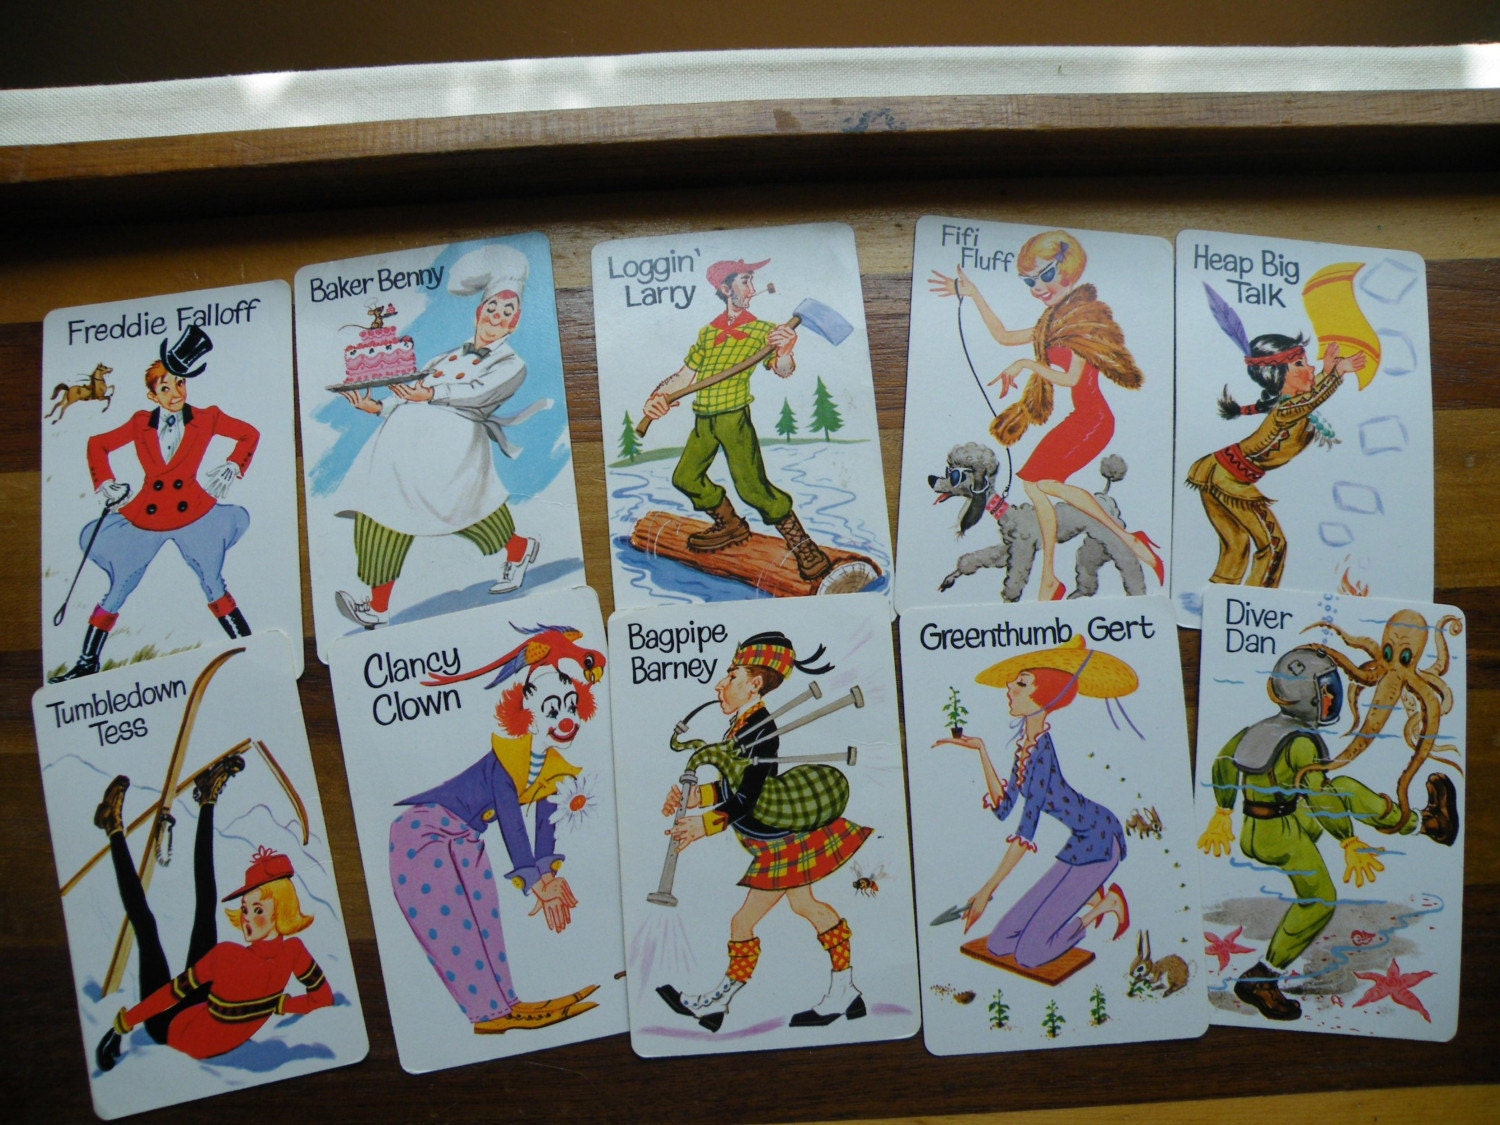 picture of old maid cards